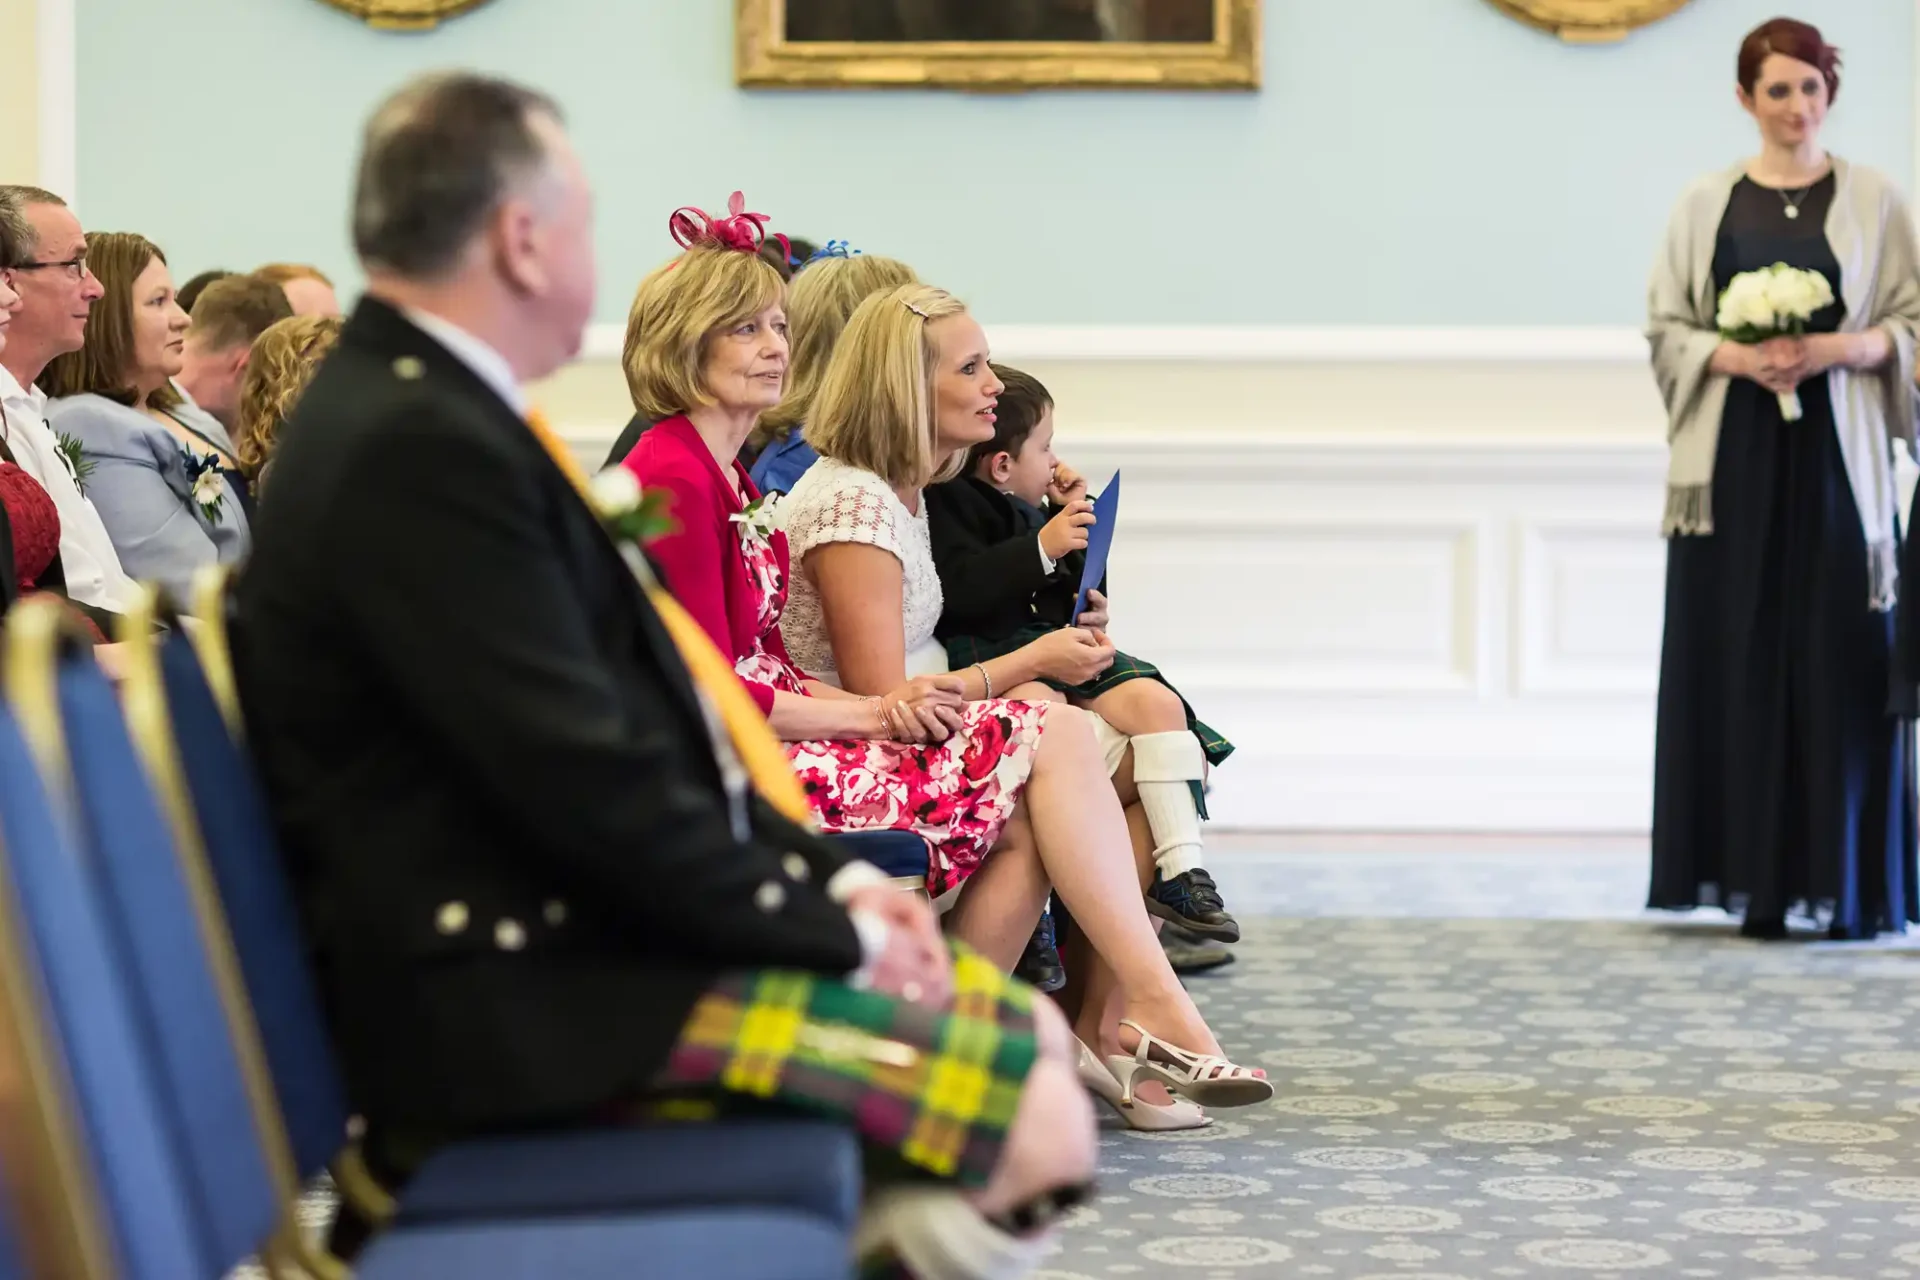 A group of guests seated in rows at a formal event, attentively watching a ceremony. a man in a kilt and a woman holding a bouquet are visible.